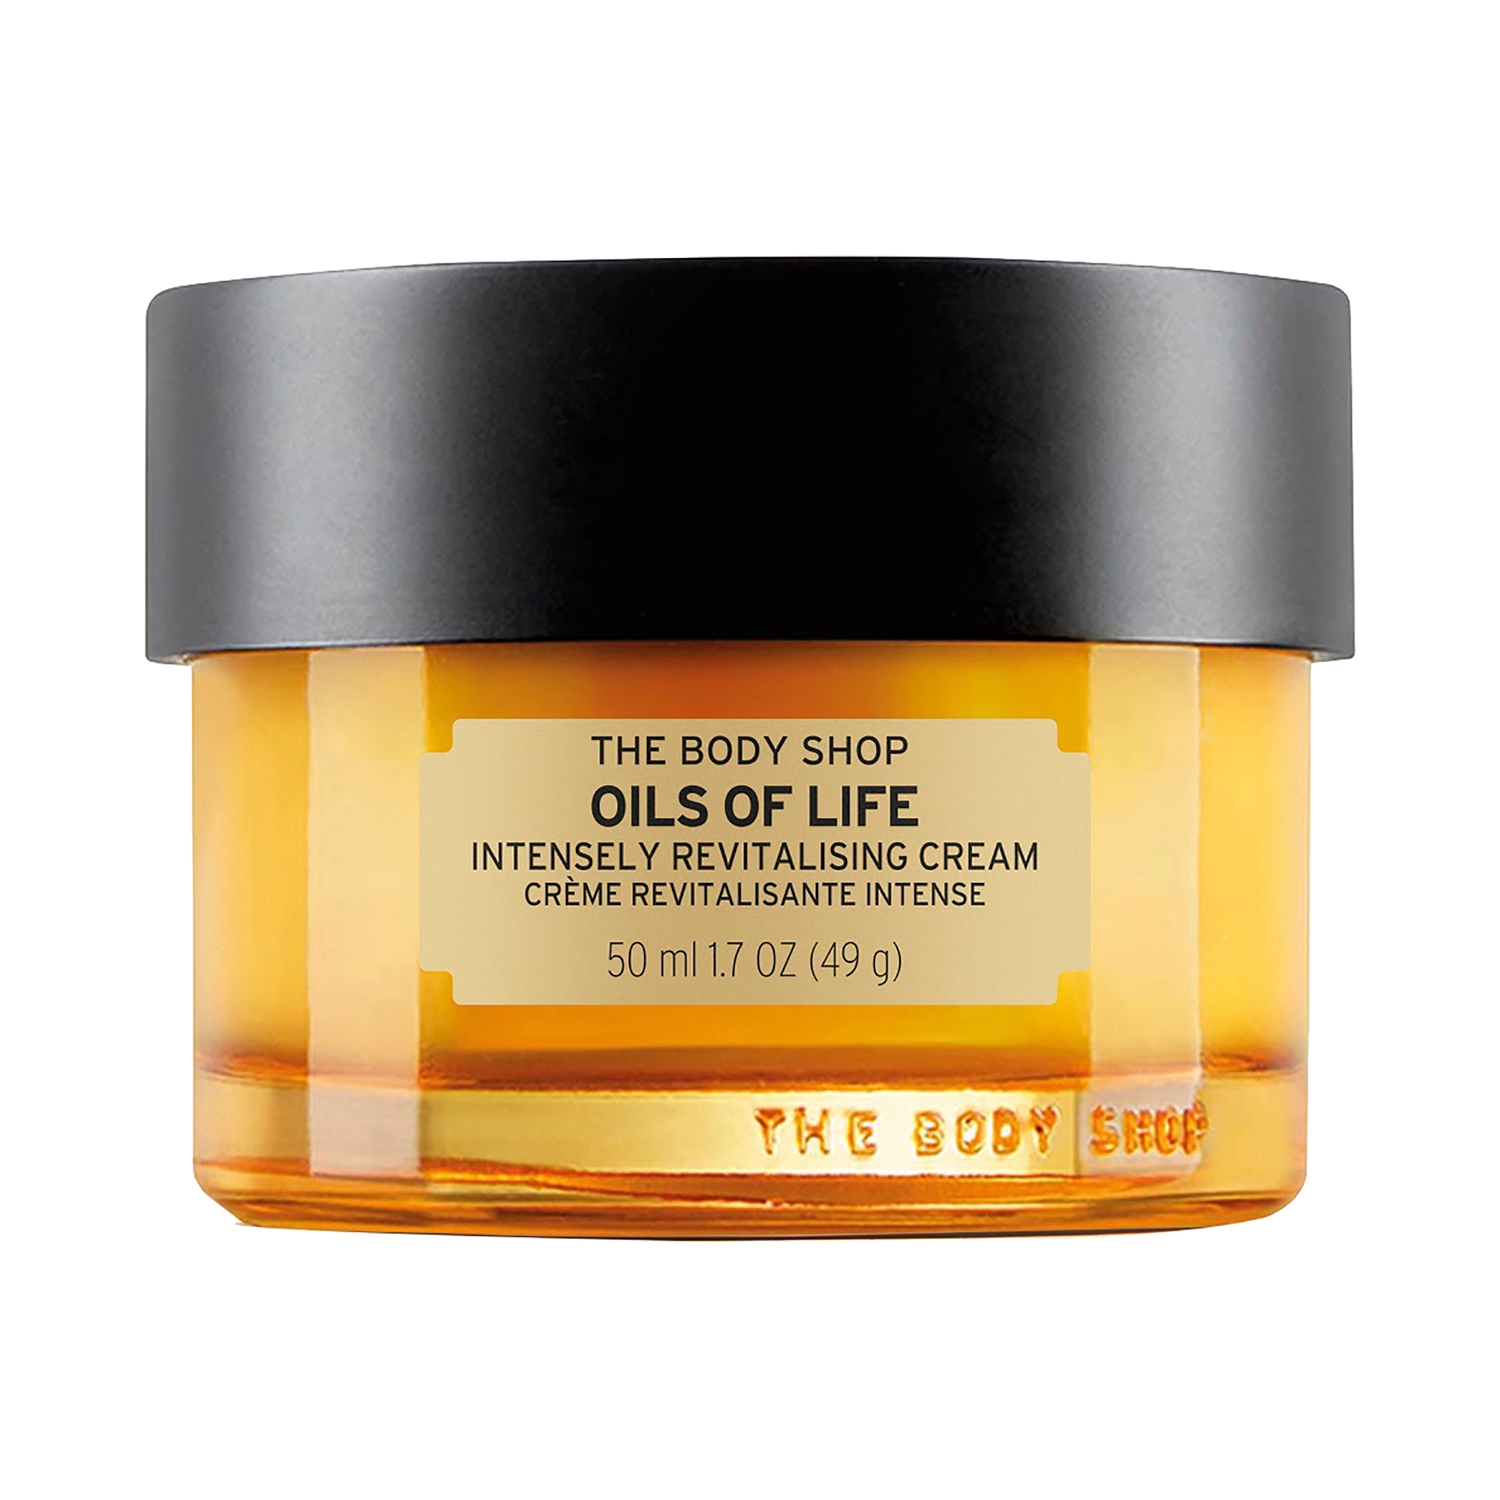 The Body Shop | The Body Shop Oils Of Life Intensely Revitalizing Cream (50ml)